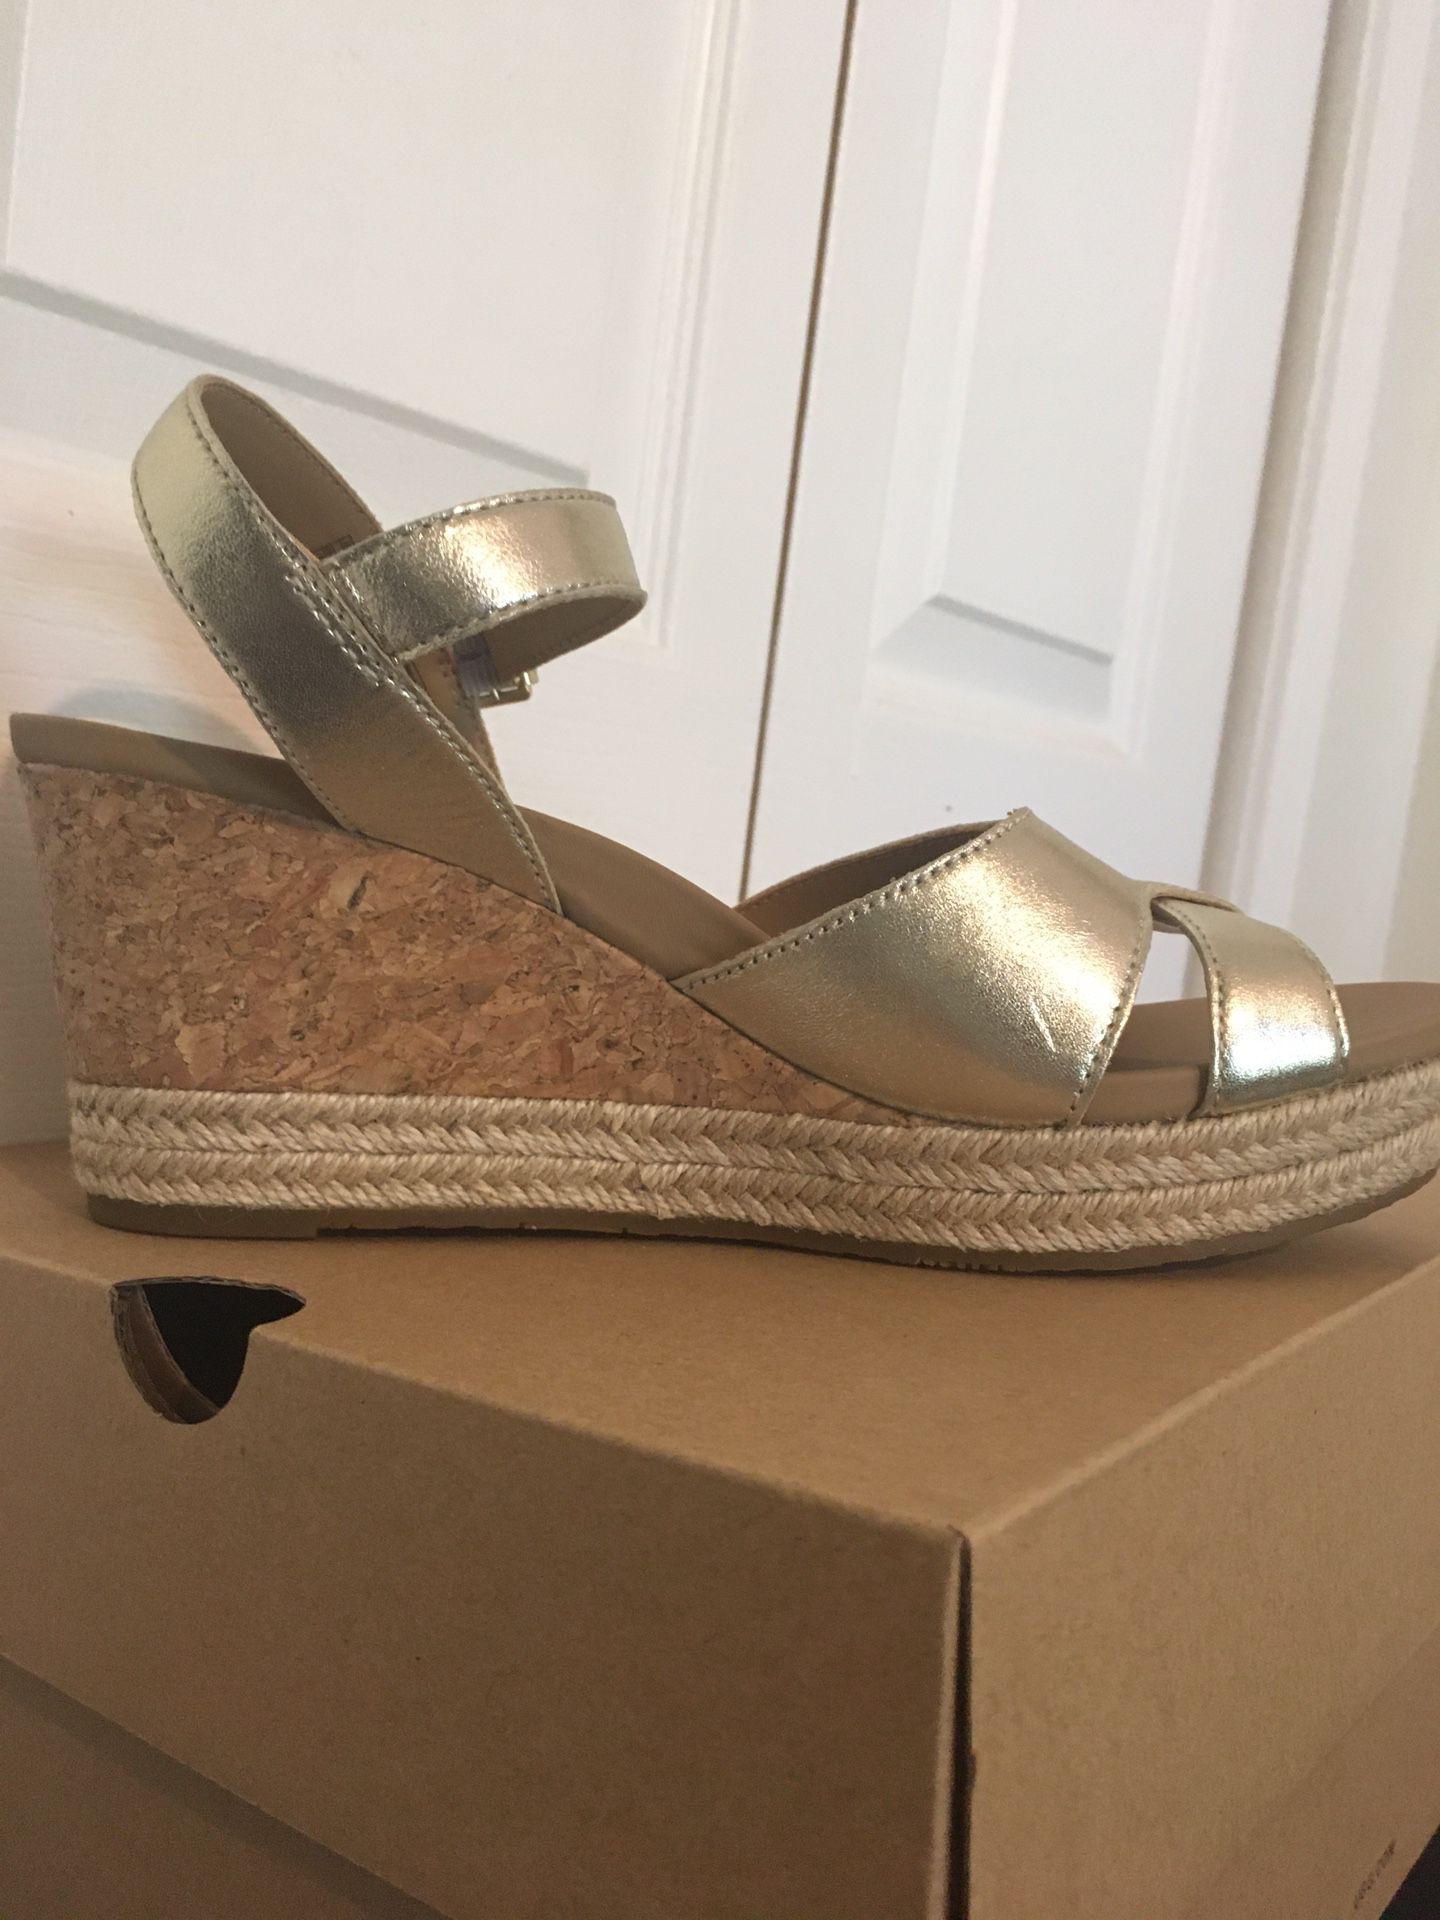 Ugg’s New Cork Sandals  (never Used)